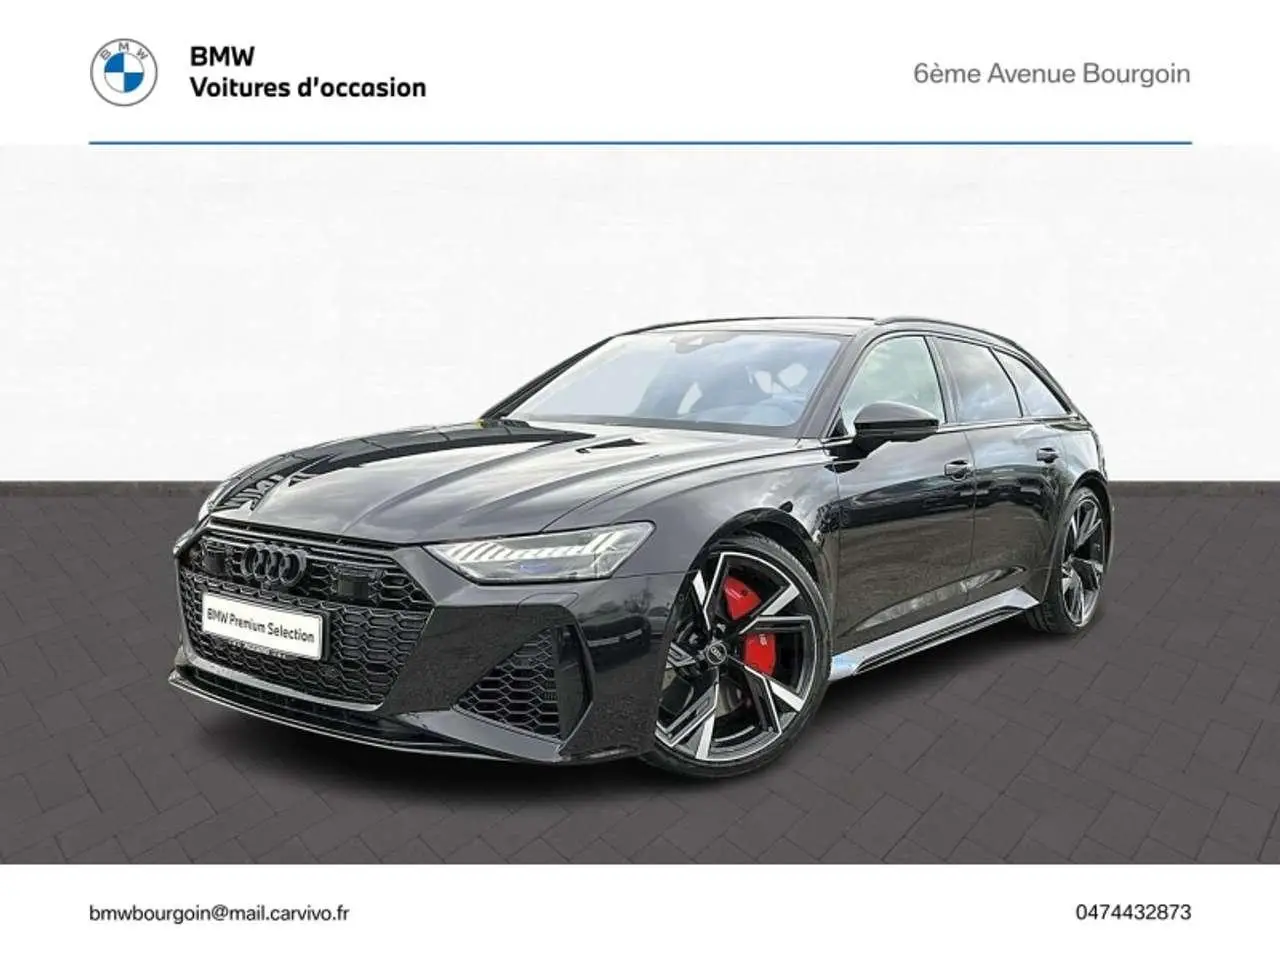 Photo 1 : Audi Rs6 2020 Others